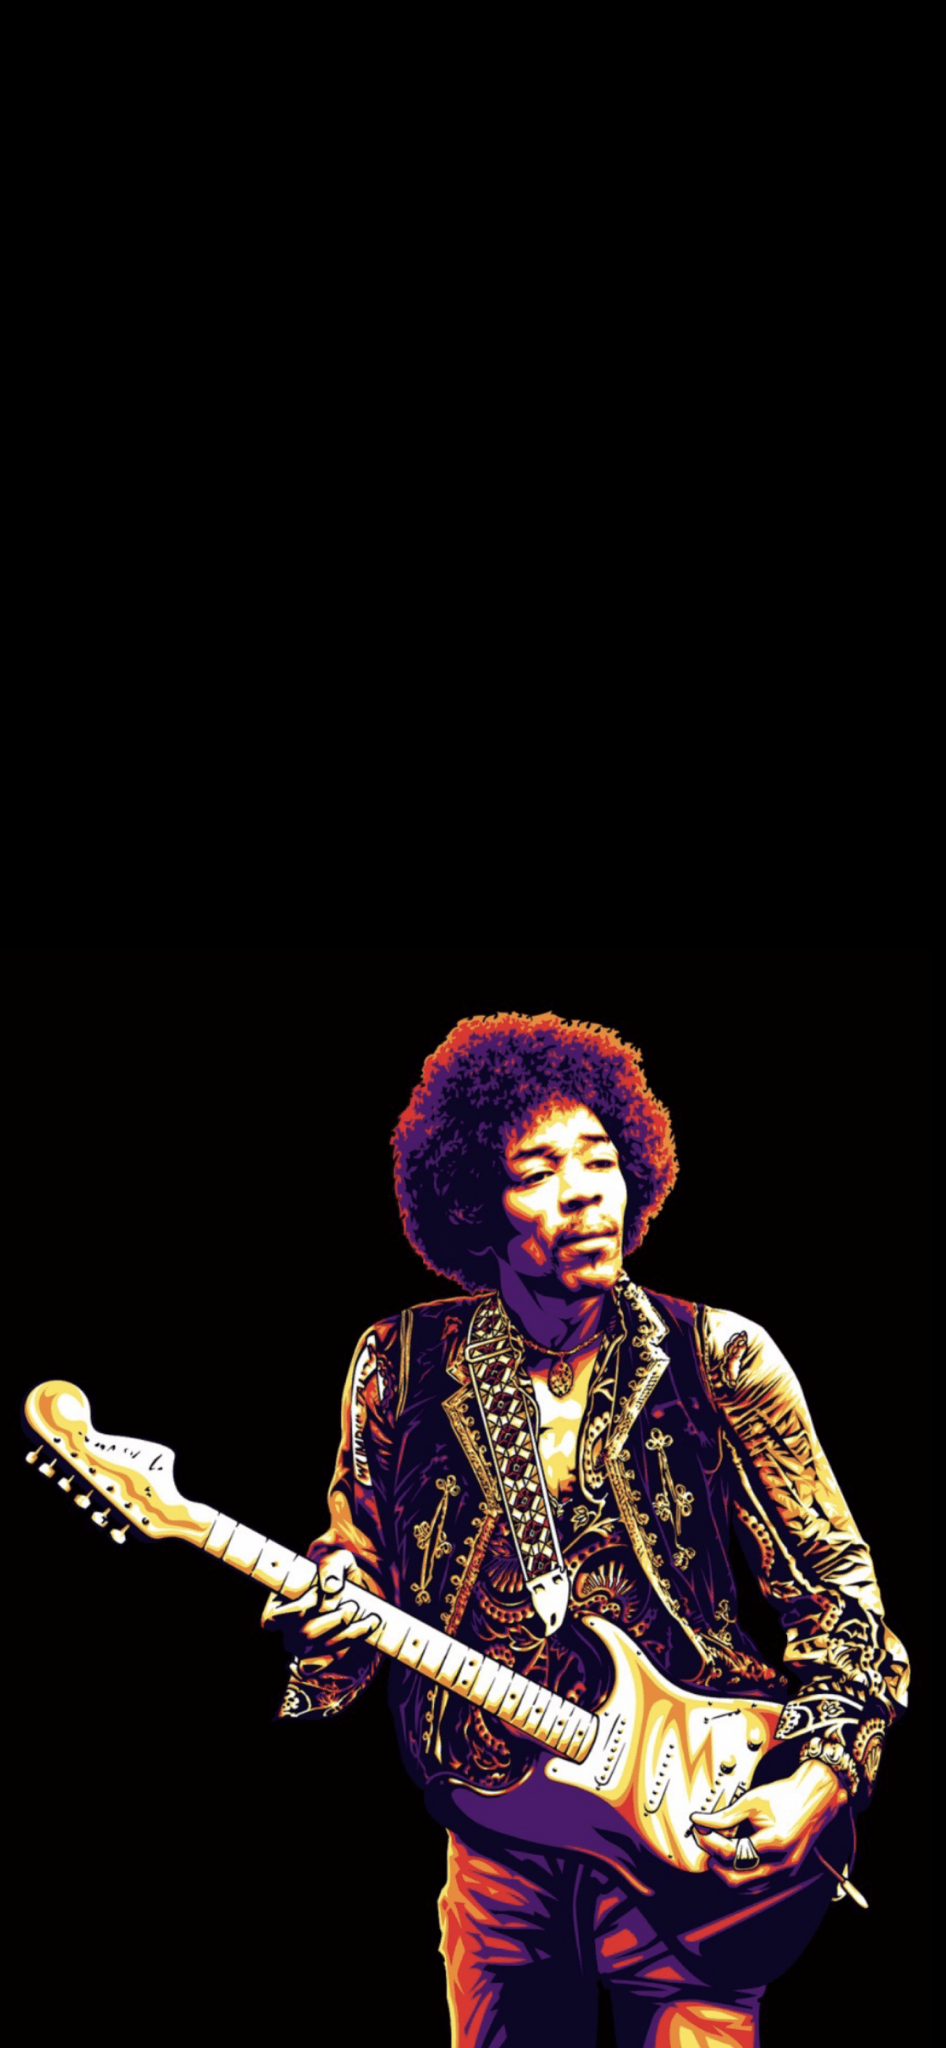 Jimi Hendrix wallpapers for desktop download free Jimi Hendrix pictures  and backgrounds for PC  moborg